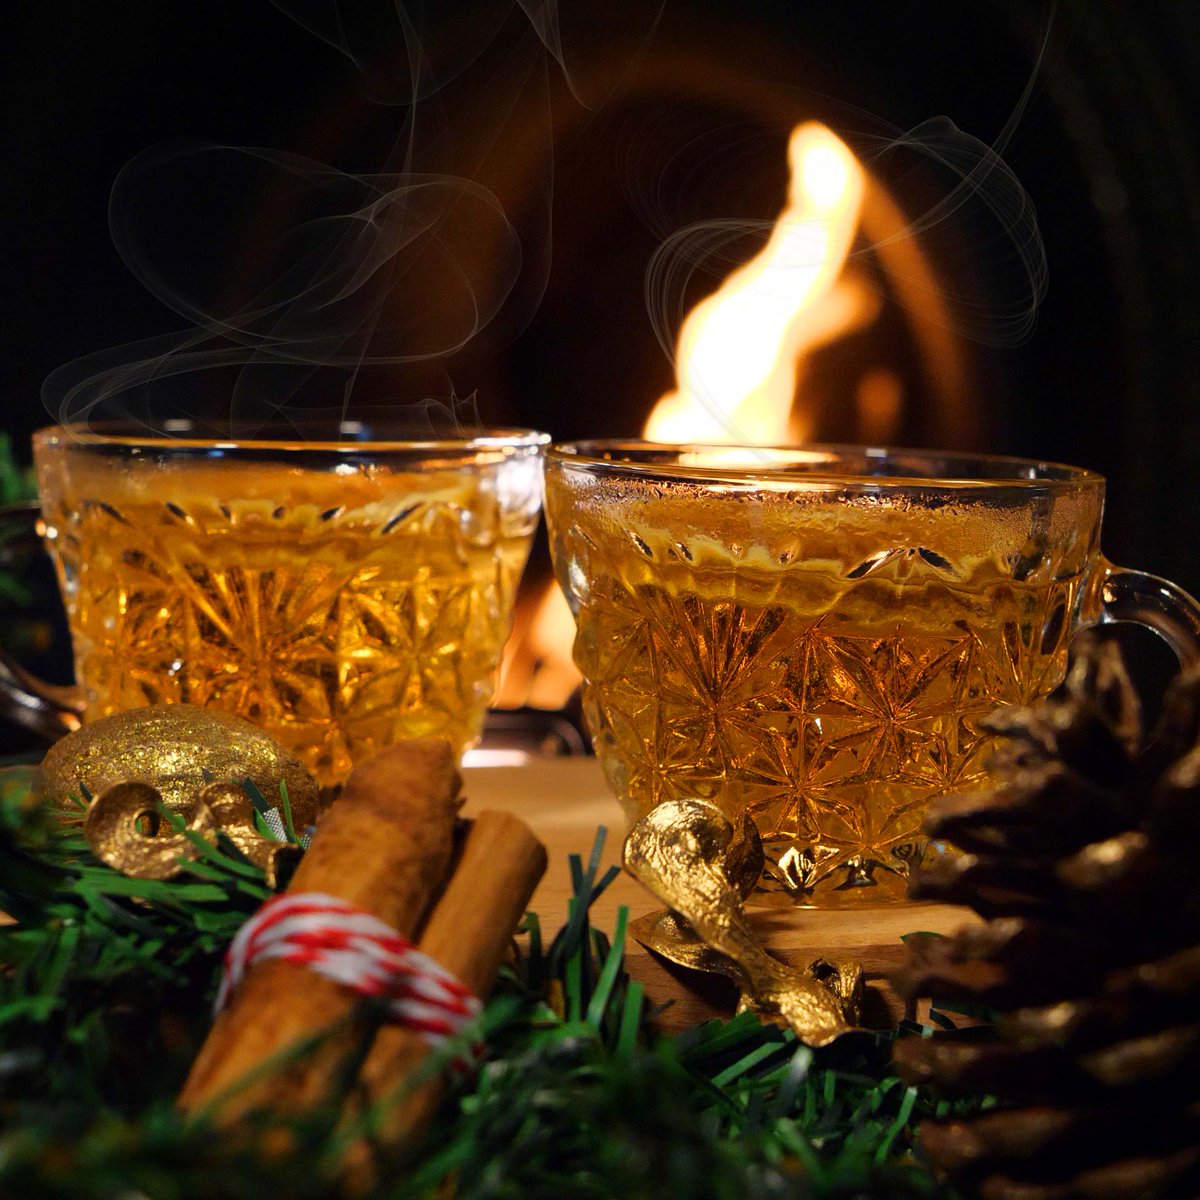 Not a fan of mulled wine? Mull your gin instead! Our Spiced Gin is literally like Christmas in a cup. With cinnamon, nutmeg, ginger and chilli, it is perfect when warmed with Apple Juice and Honey. Go on - you know you want to! #mulledwine #mulledgin #warming #winterwarmer #gin